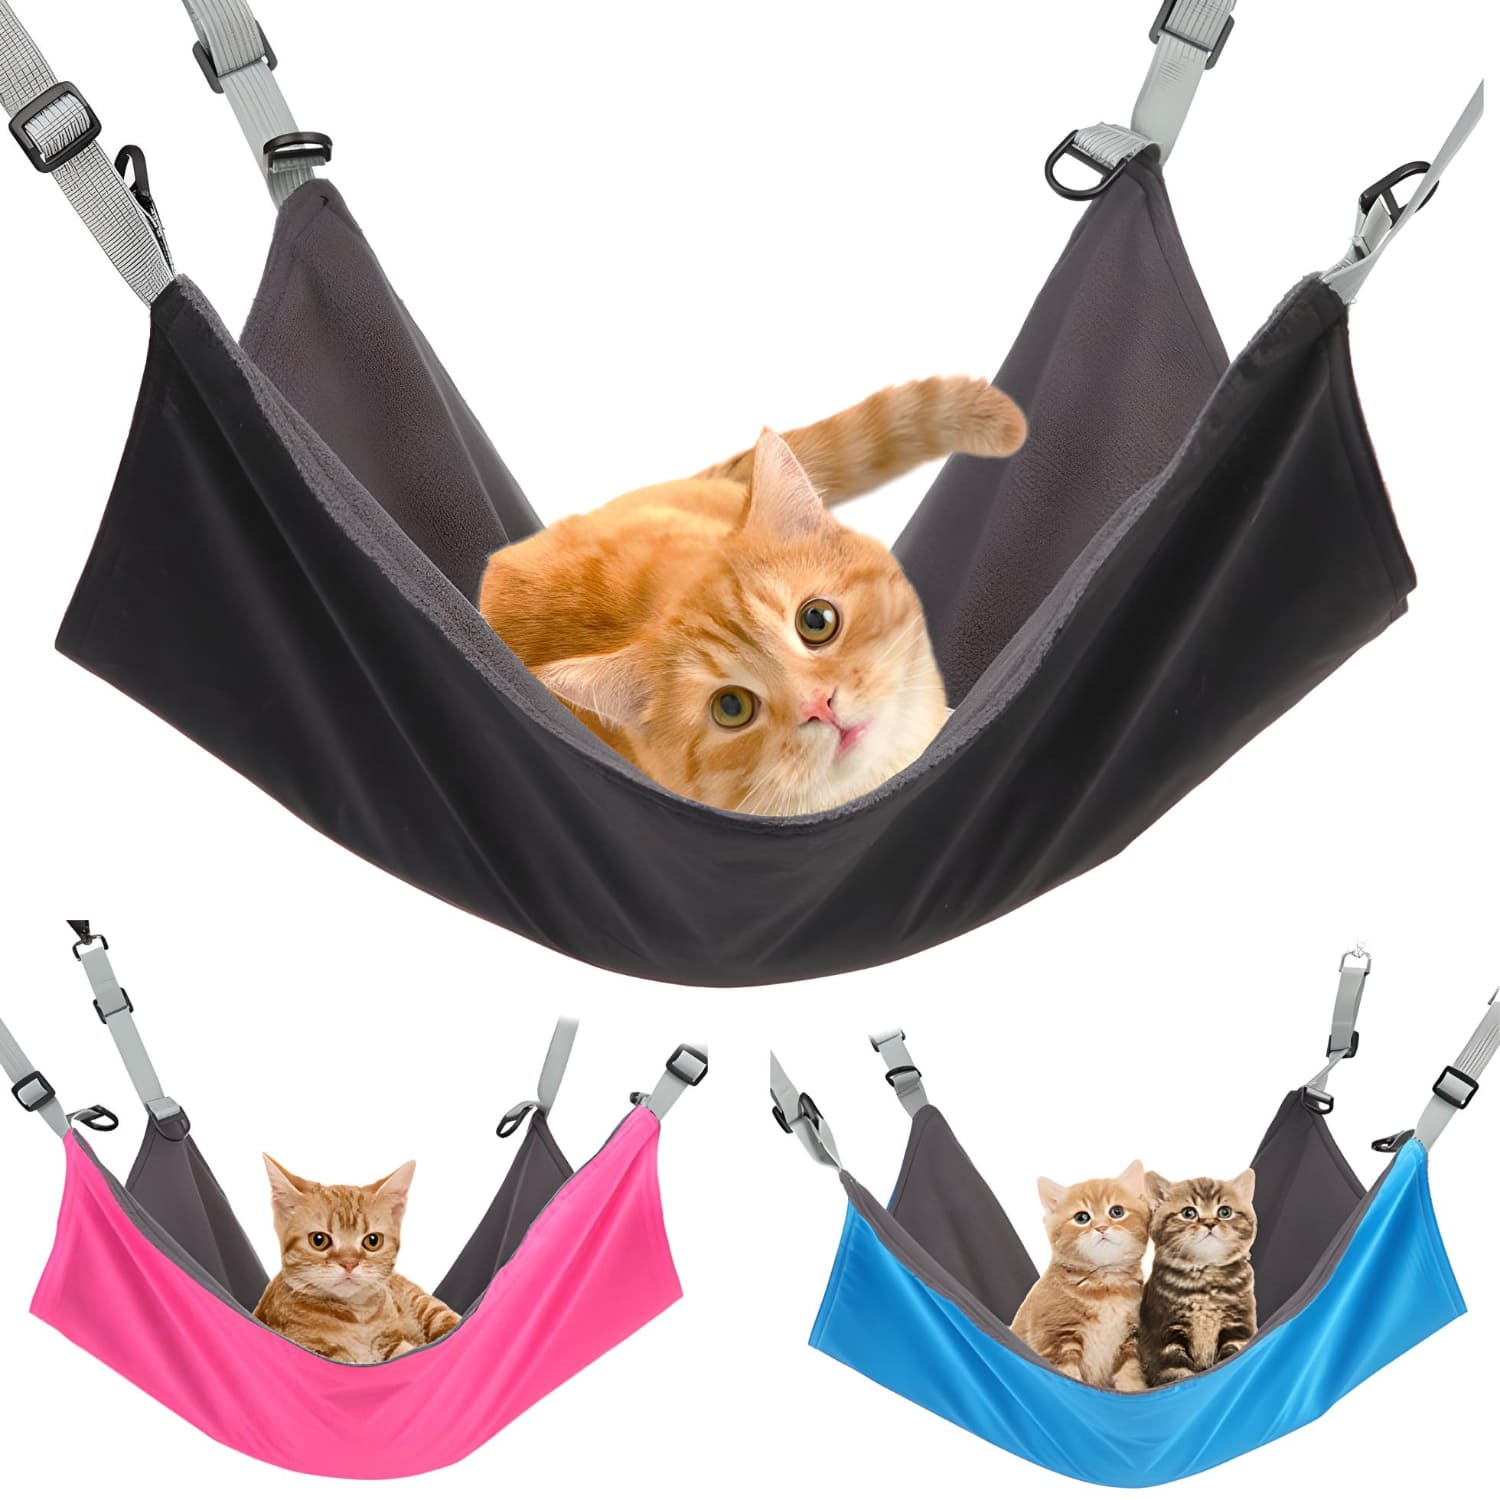 Copy-of-a-group-of-cats-hanging-pet-bed